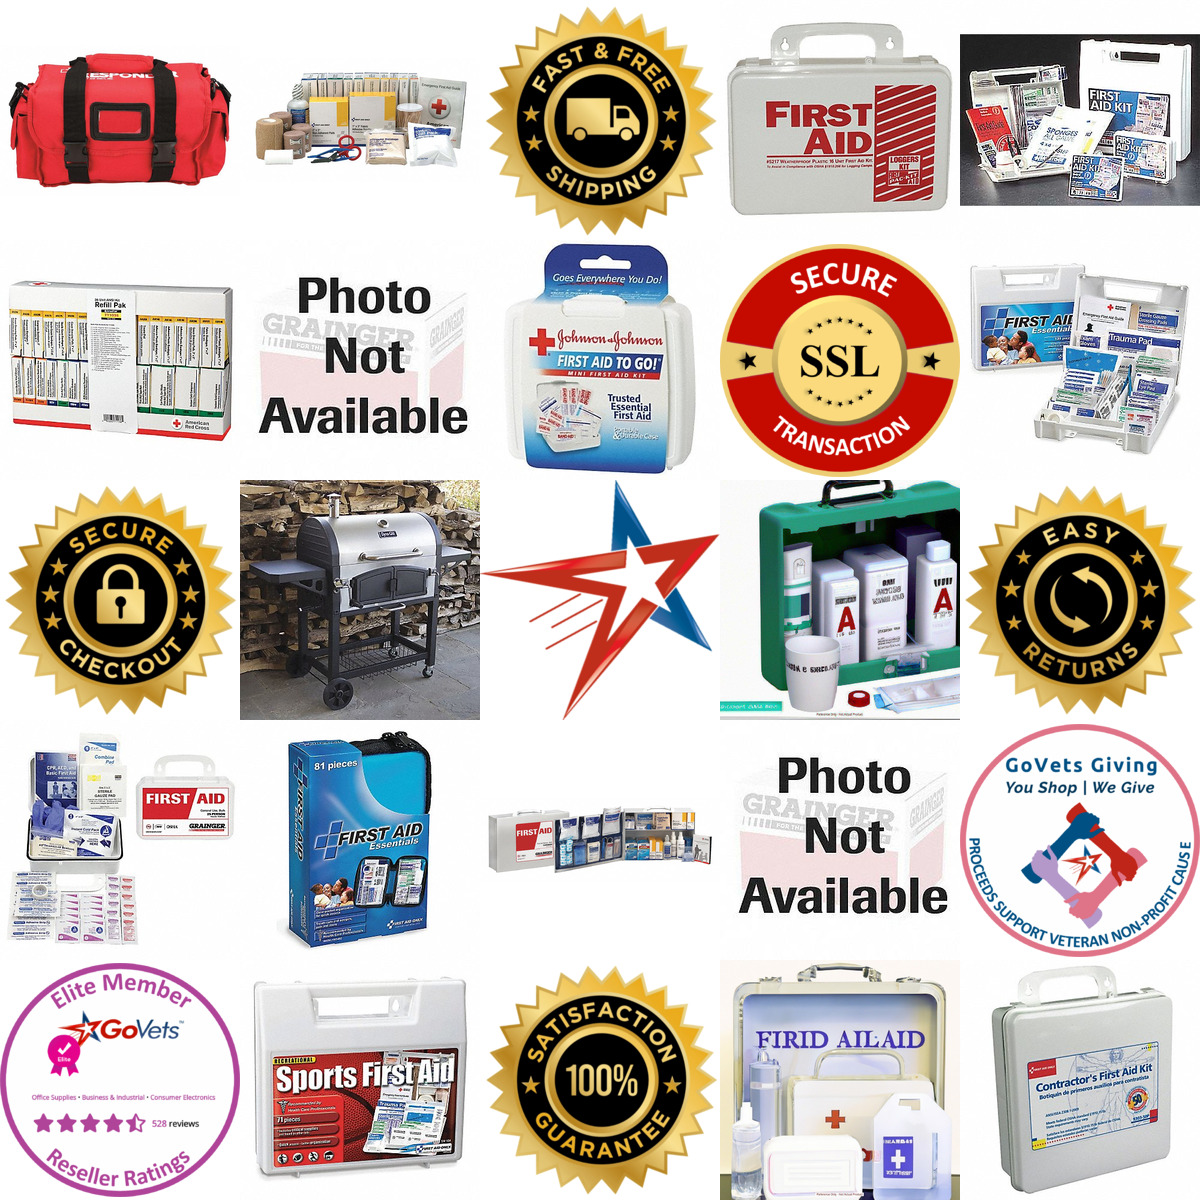 A selection of First Aid Kits and Refills products on GoVets